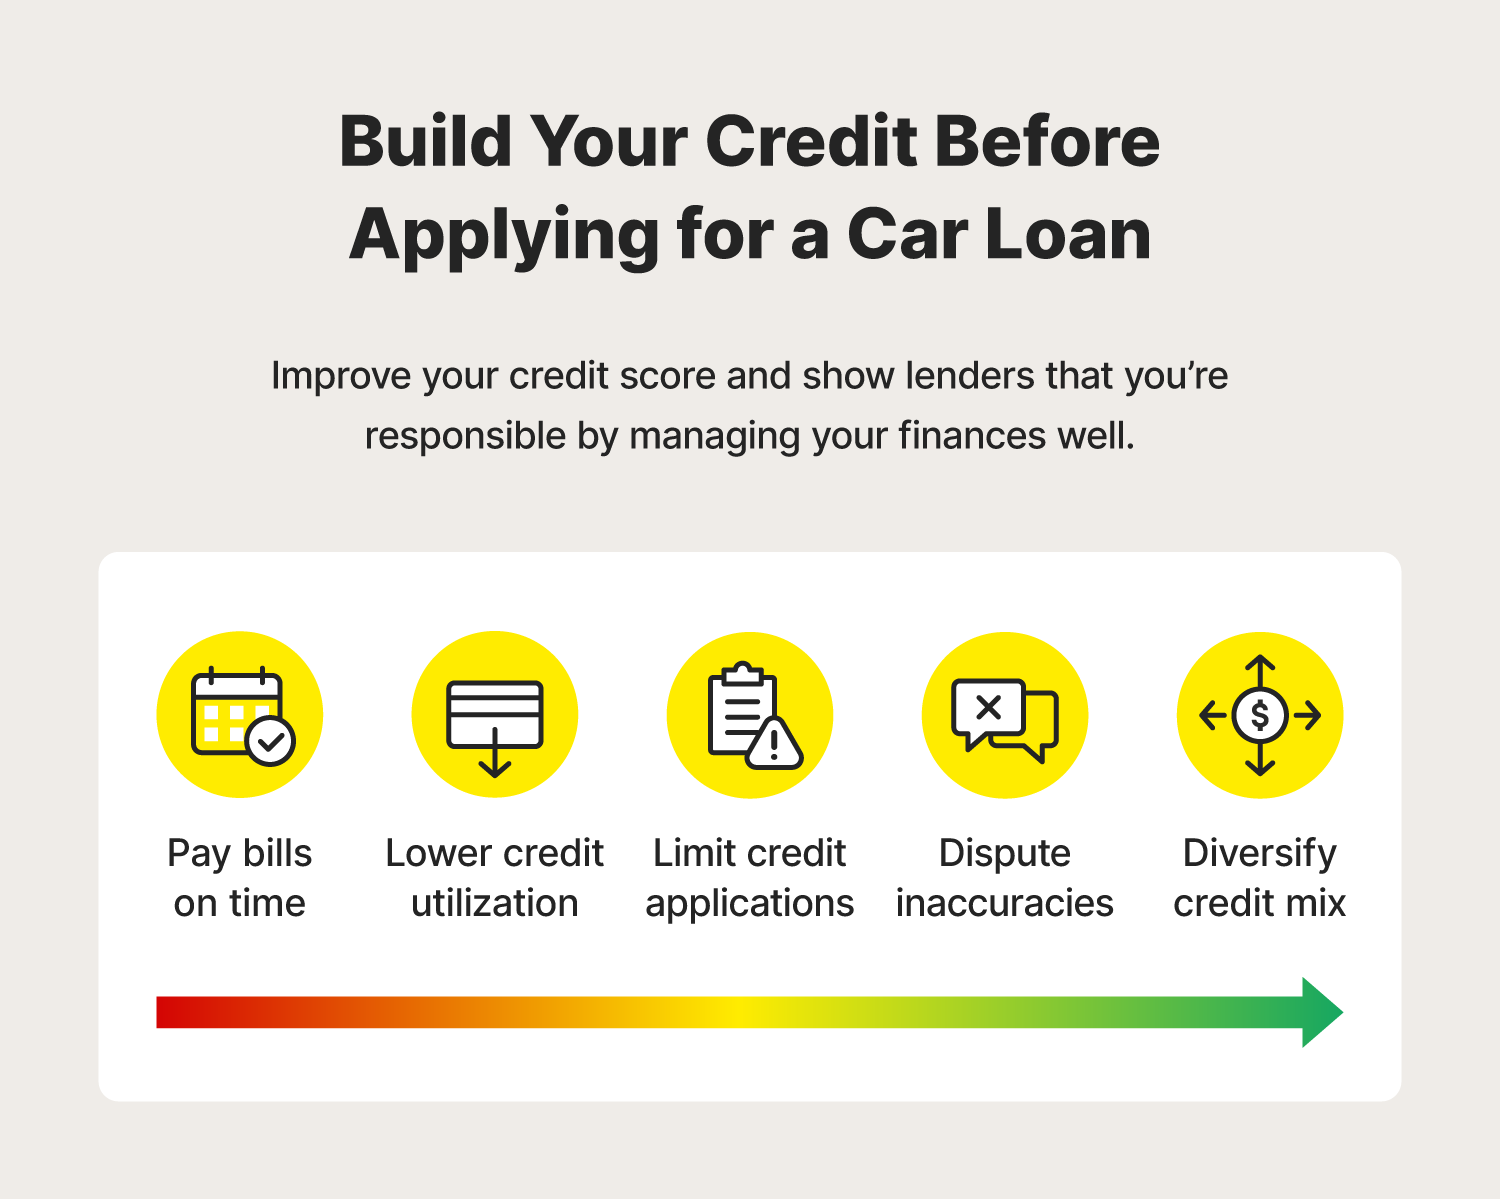 Ideas on how to boost your credit to qualify for better auto loan terms.